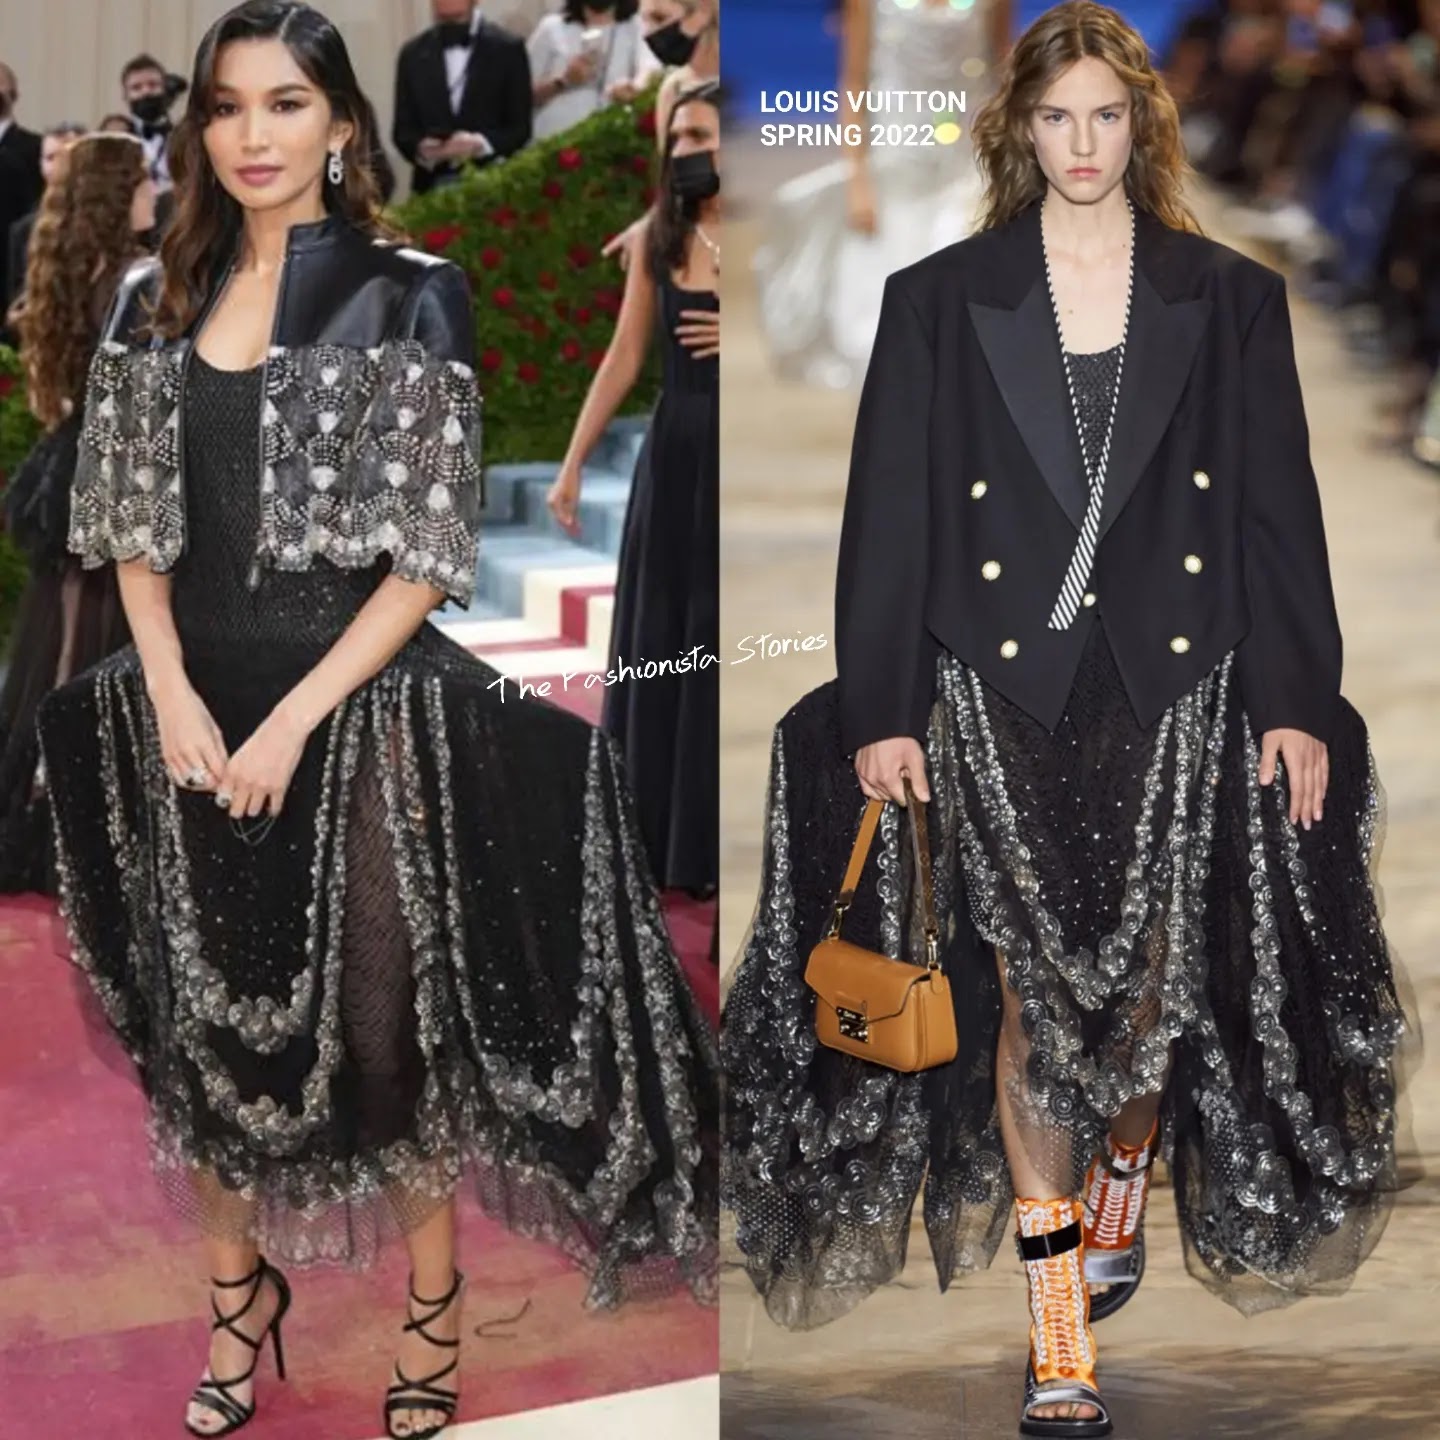 Louis Vuitton Dressed Emma Stone, Gemma Chan, Sophie Turner And More In  Archive Or Pre-Worn Looks For The Met Gala